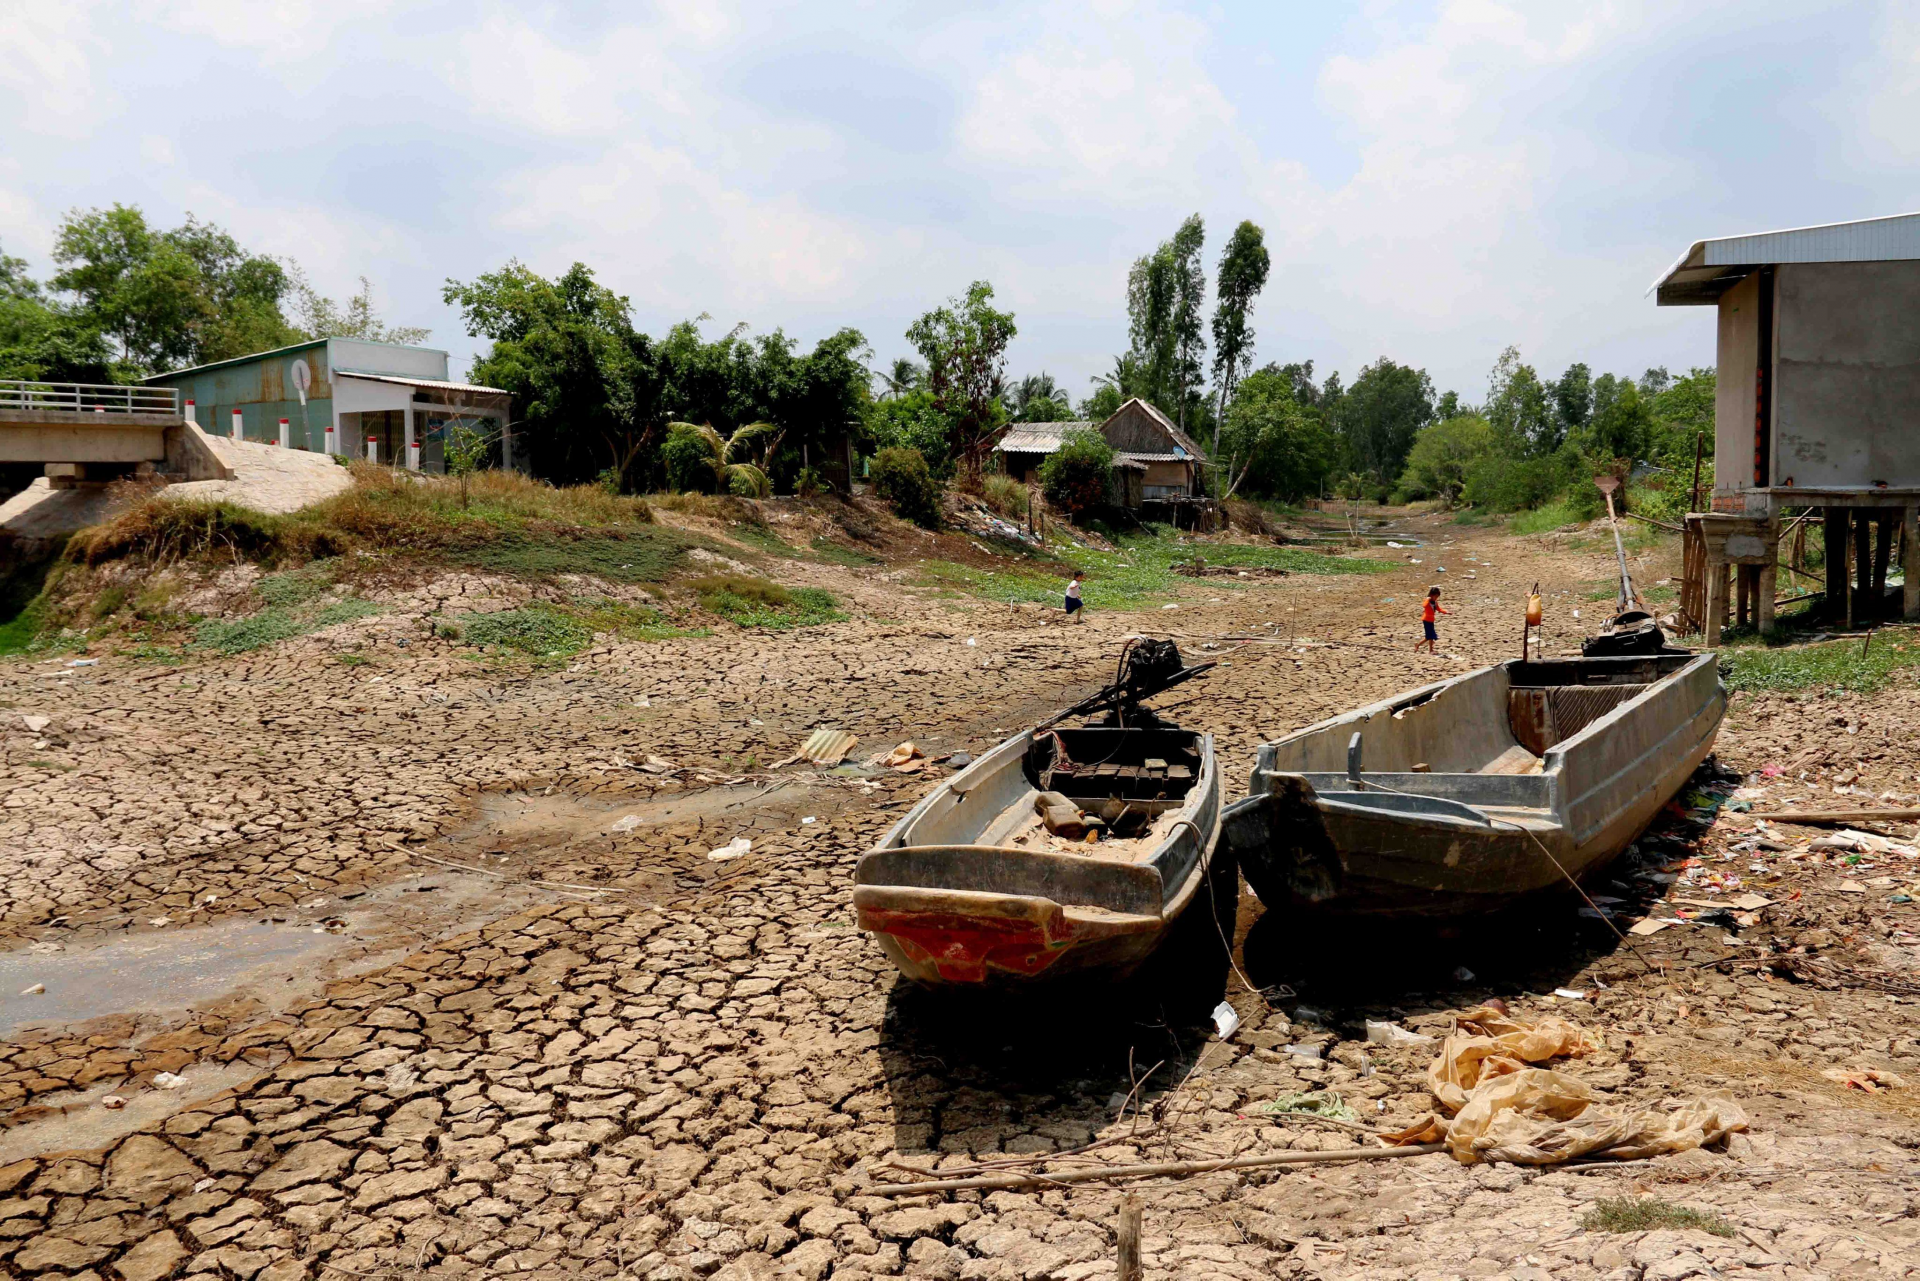 record drought and salinity with desperate fresh water shortage mekong delta crying for help